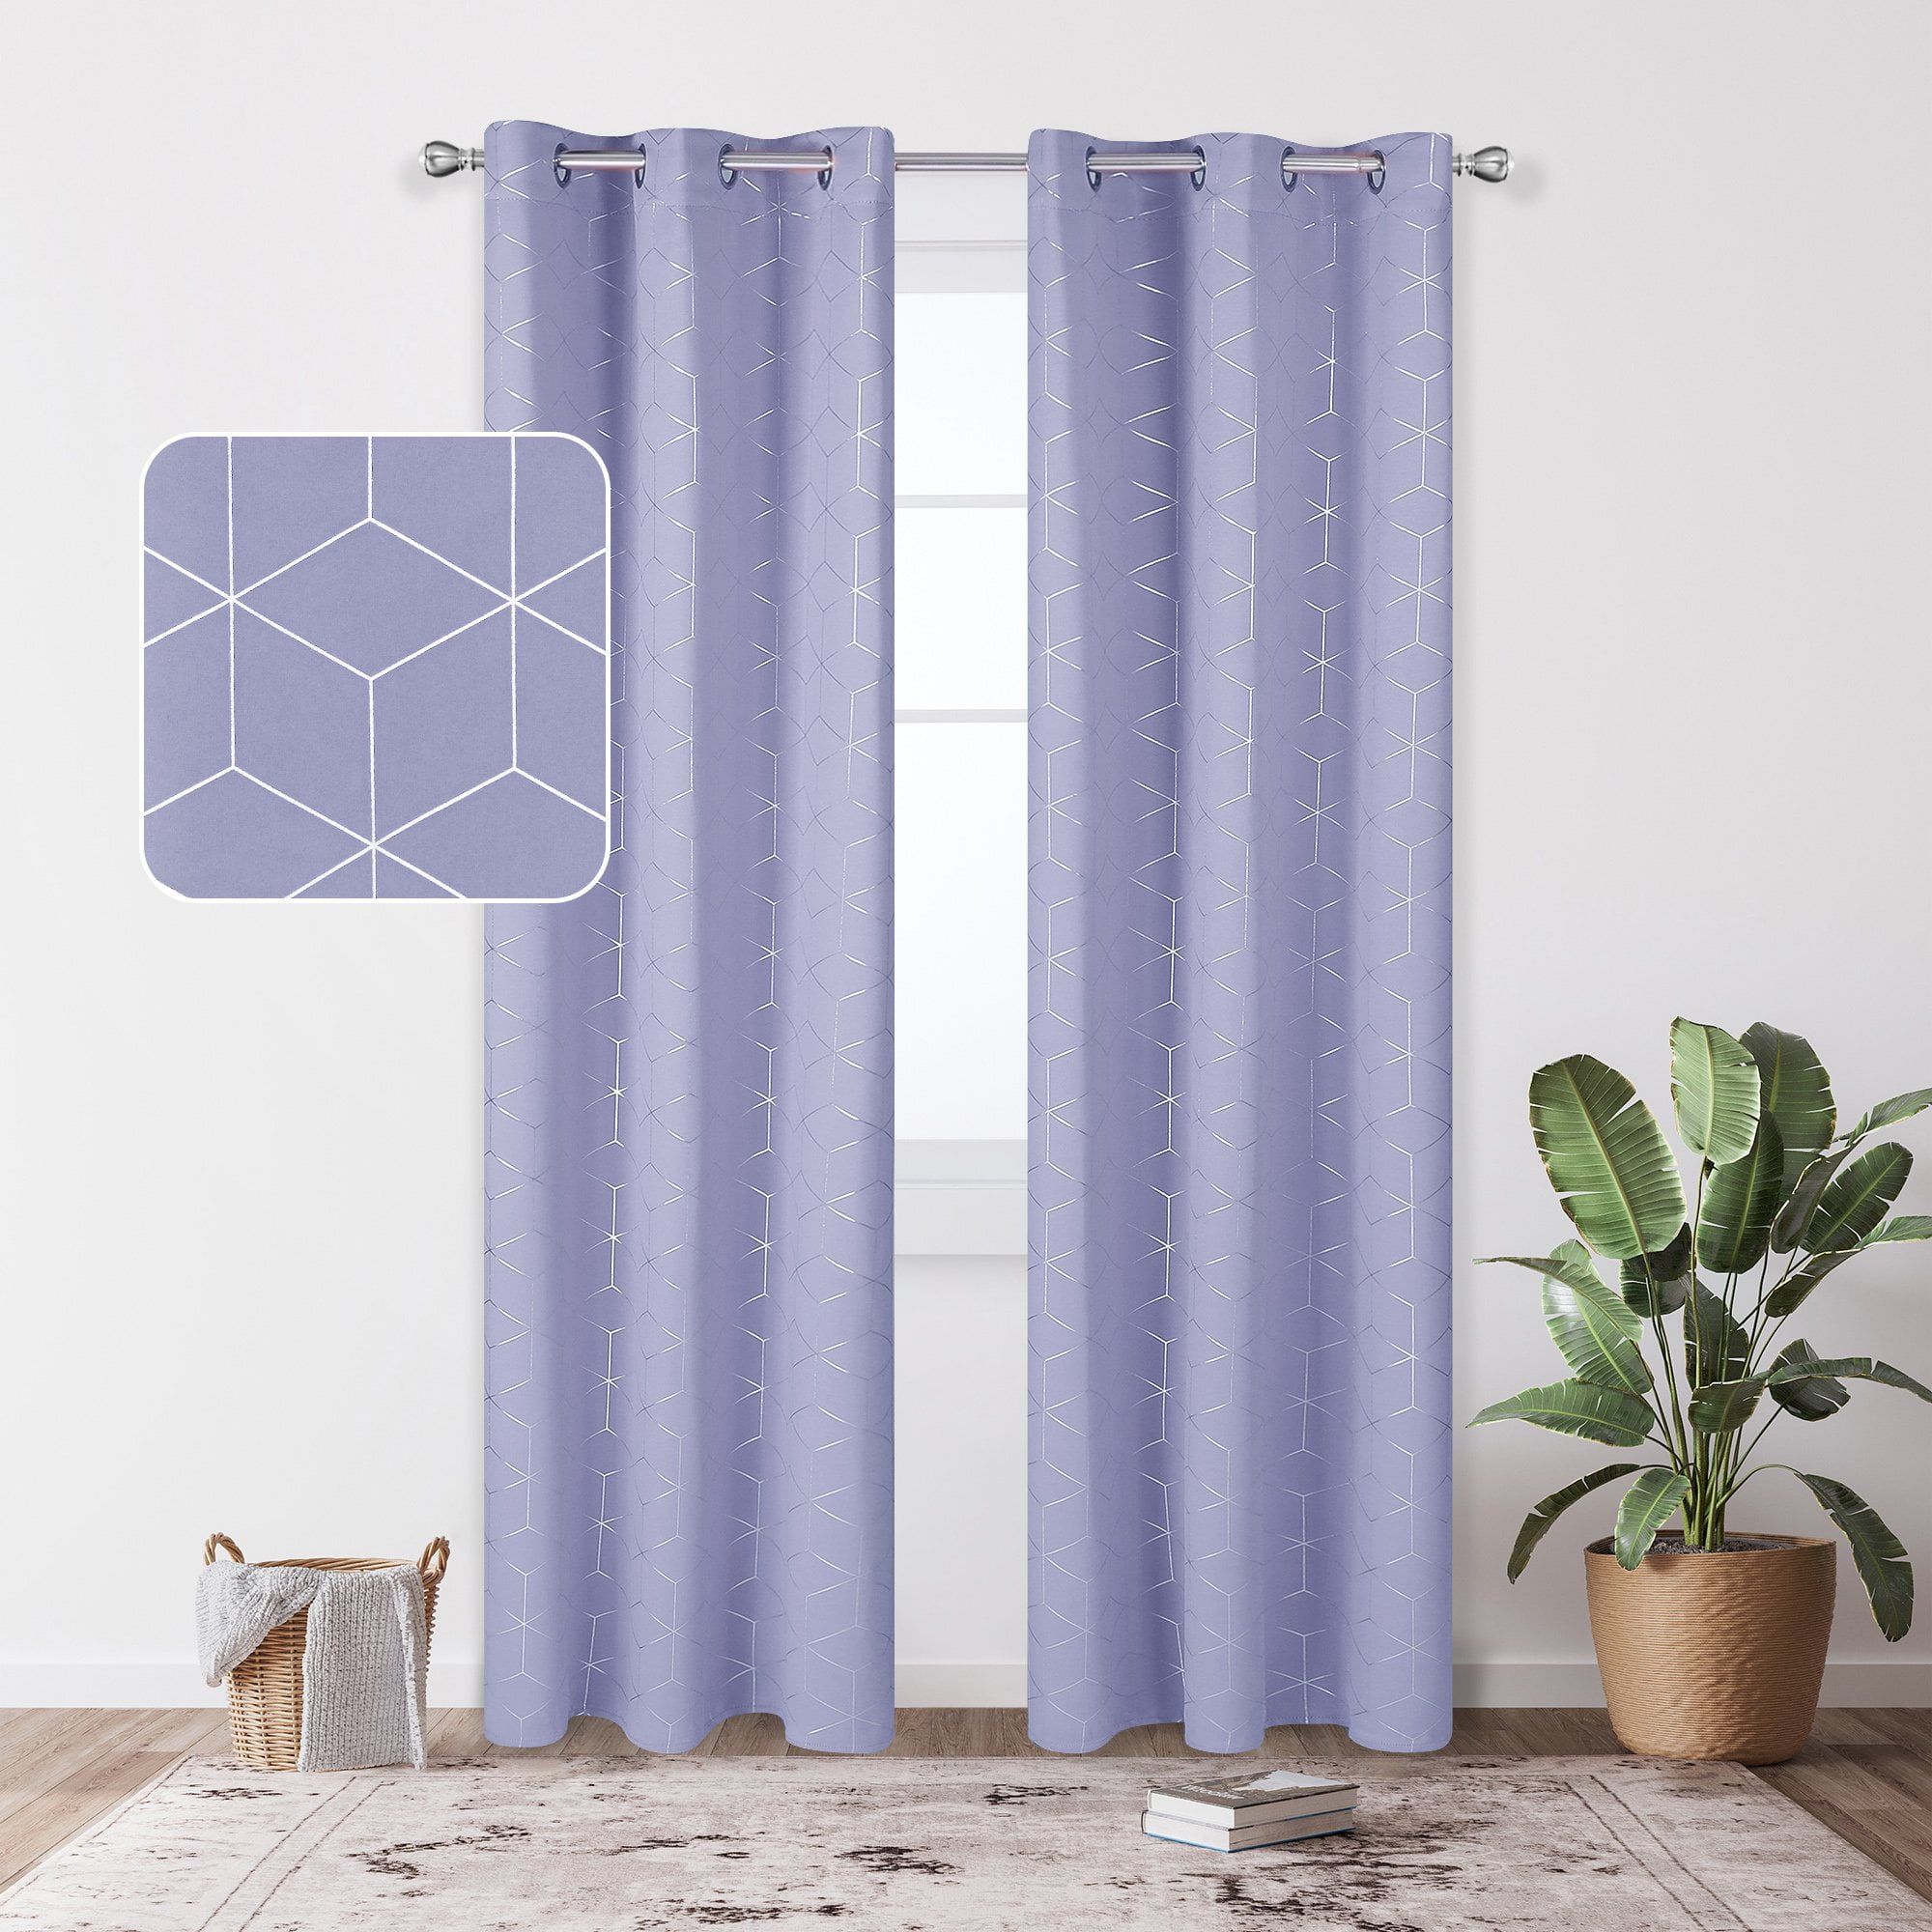 Deconovo Silver Diamond Foil Print Room Darkening Thermal Insulated  Blackout Curtains for Kids Room Purple Grape 42W x 54L inch 2 Panels 